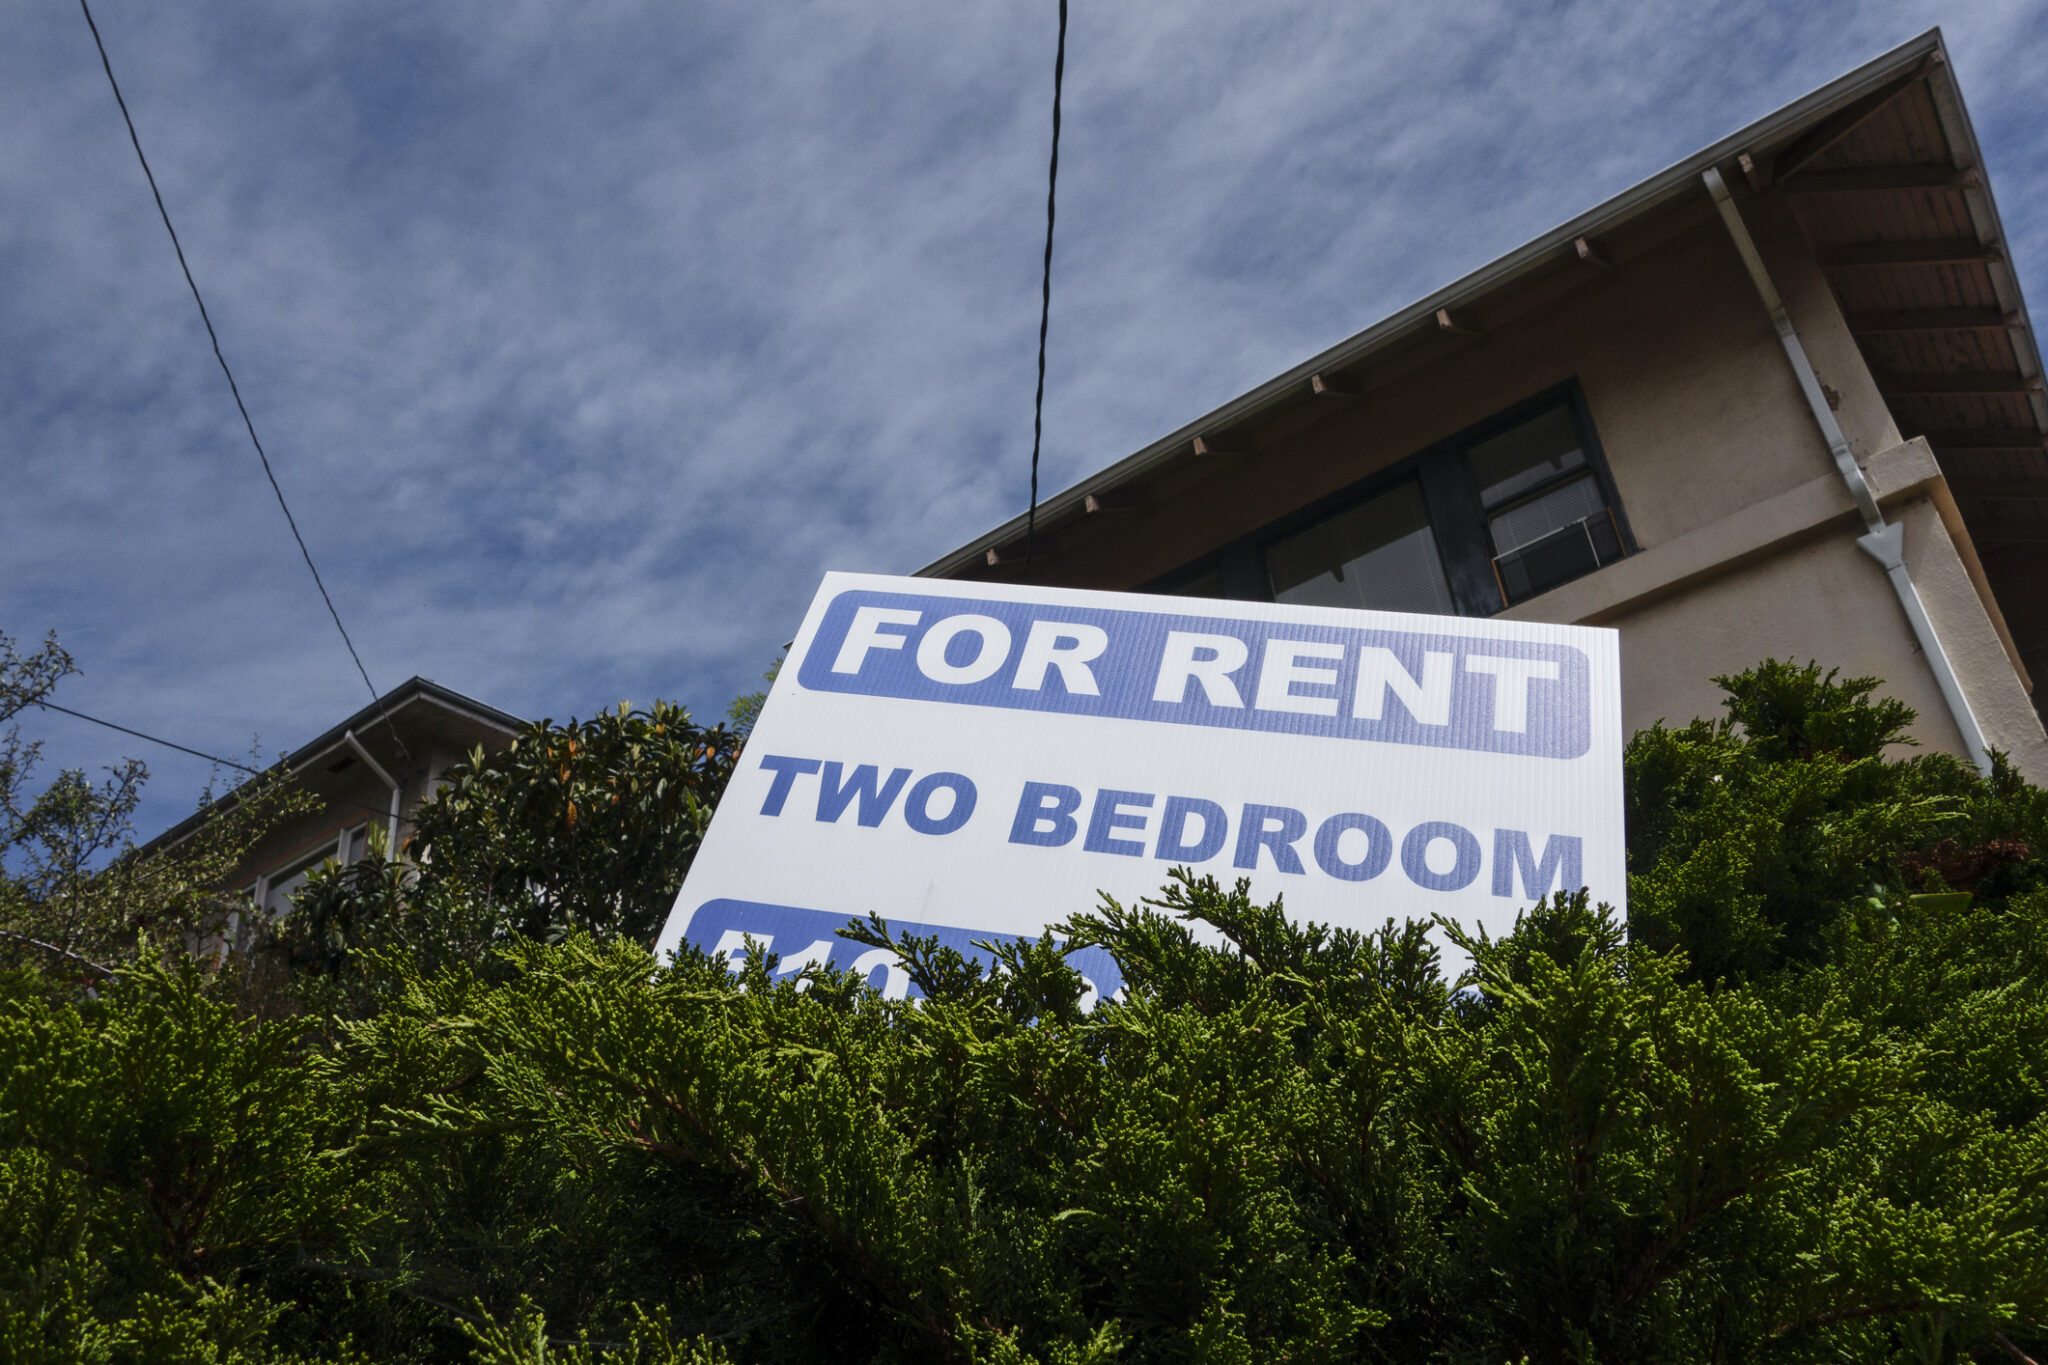 The outlook for new statewide renter protections in Washington